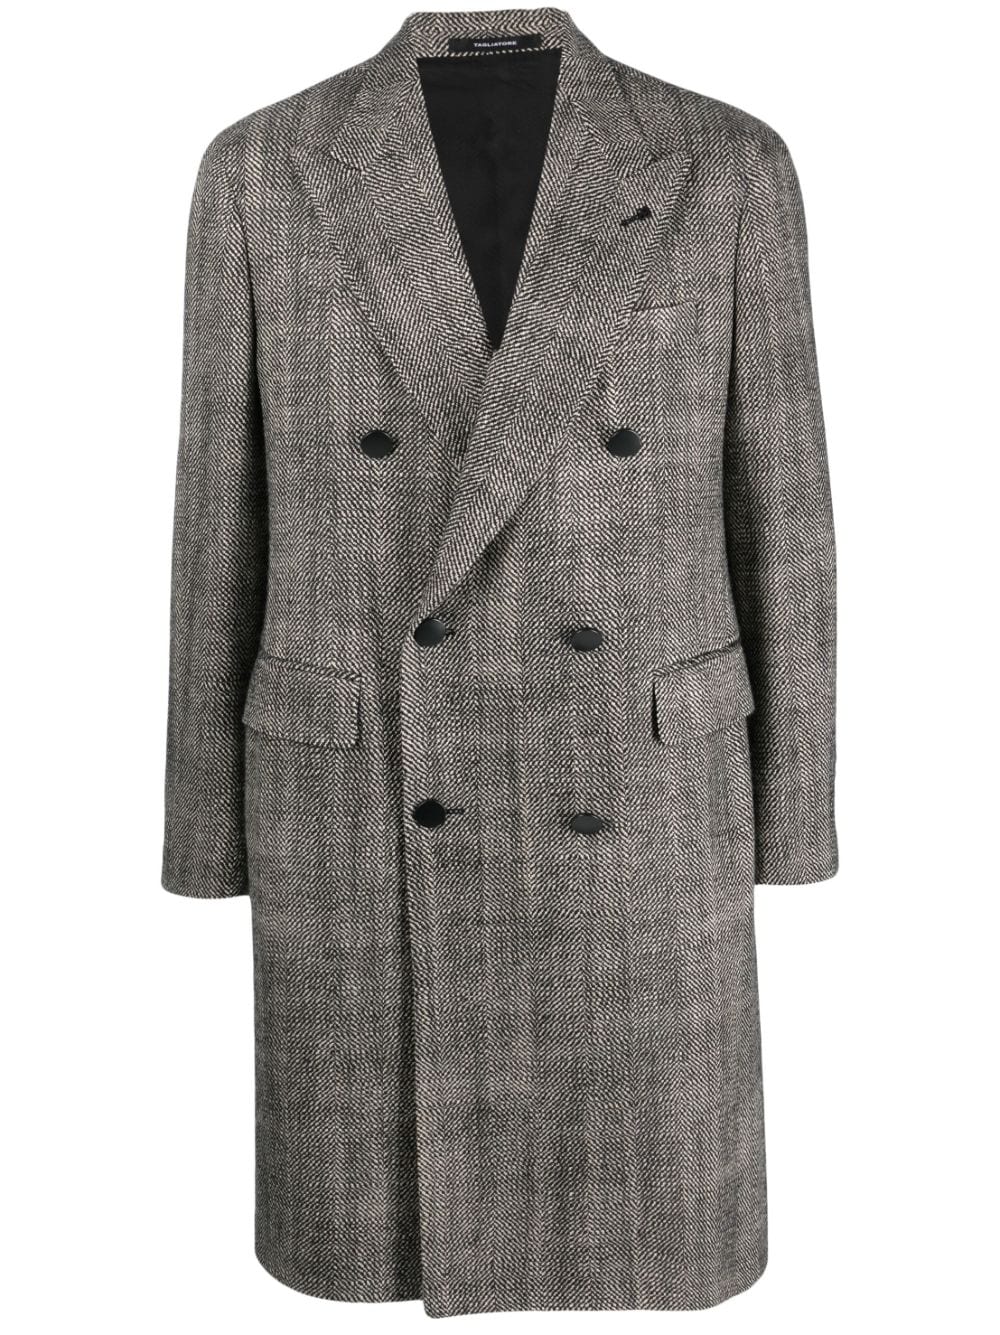 Tagliatore Double-breasted Peaked Coat In Black